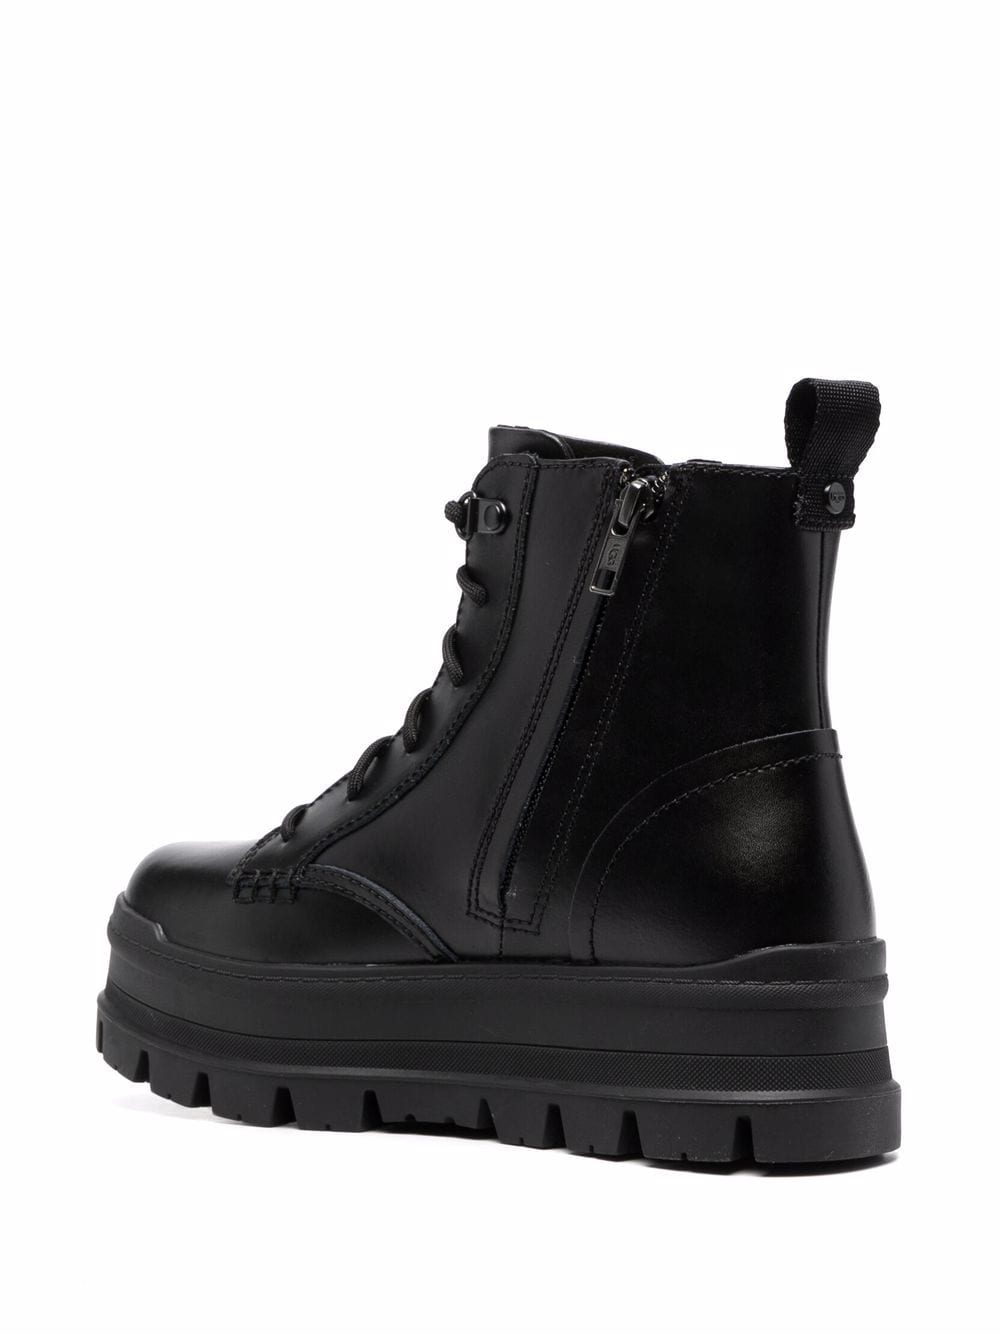 Shop UGG laced side boots with Express Delivery - FARFETCH